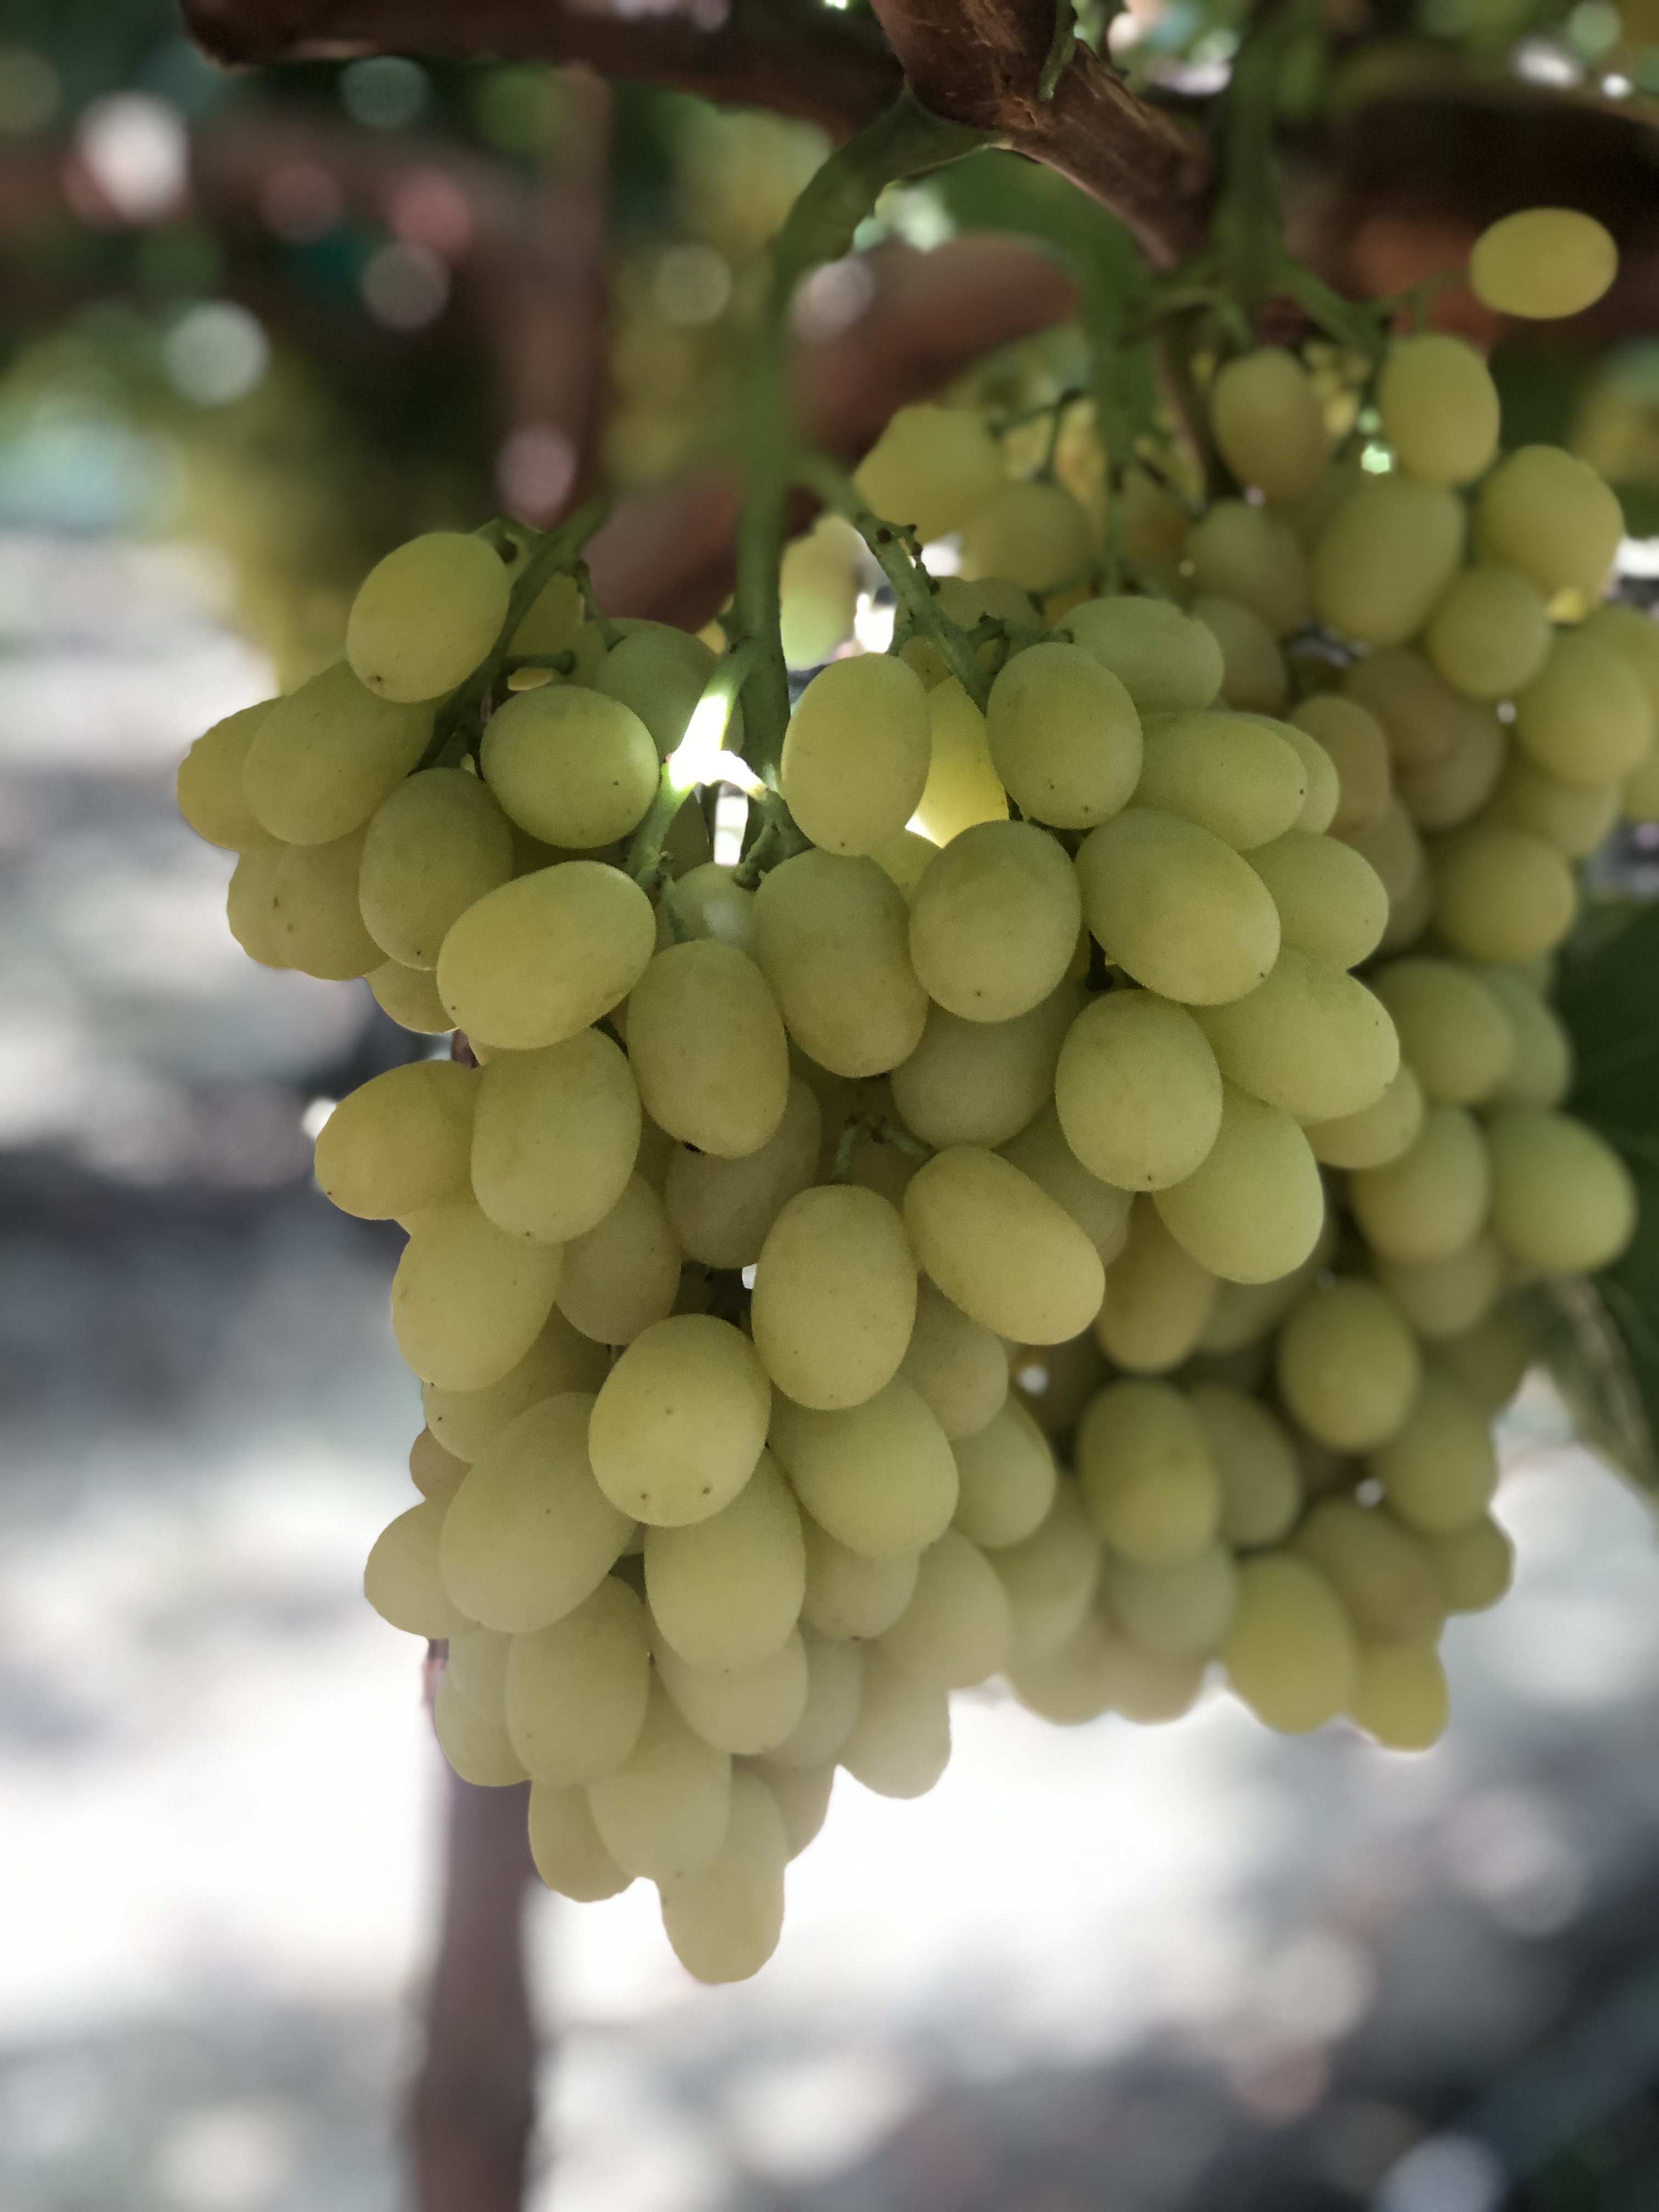 Green grapes on the vine